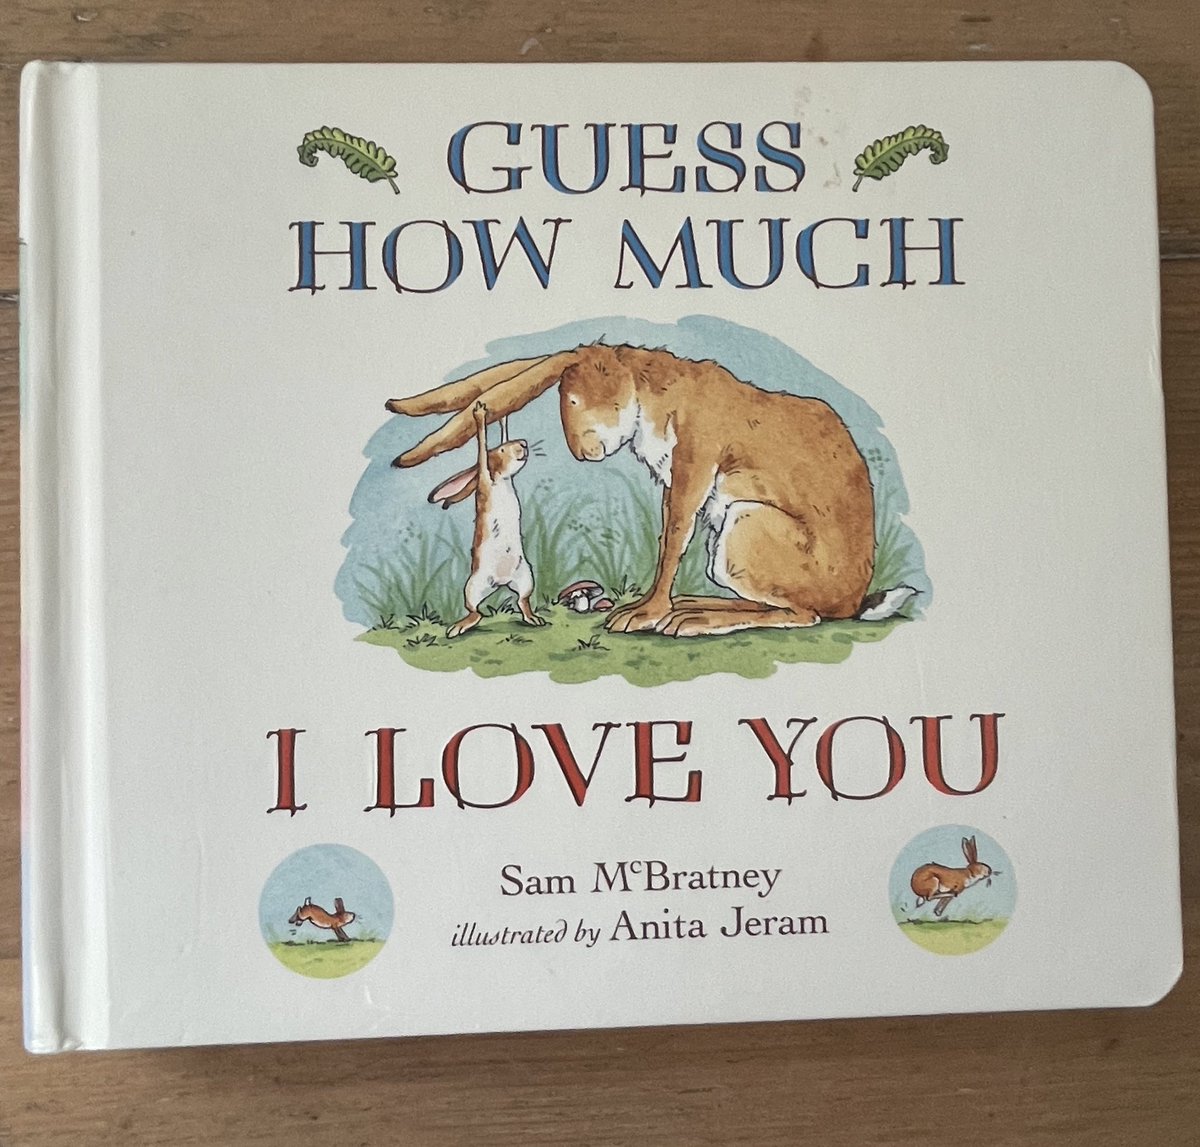 This evening’s recommended read is ‘Guess how much I love you’. This timeless classic written by Sam McBratney is a beautiful bedtime story to share with the ones you love most. ❤️📔 #readingforpleasure #reading #shareastorytogether #bedtimestories @SchoolReading